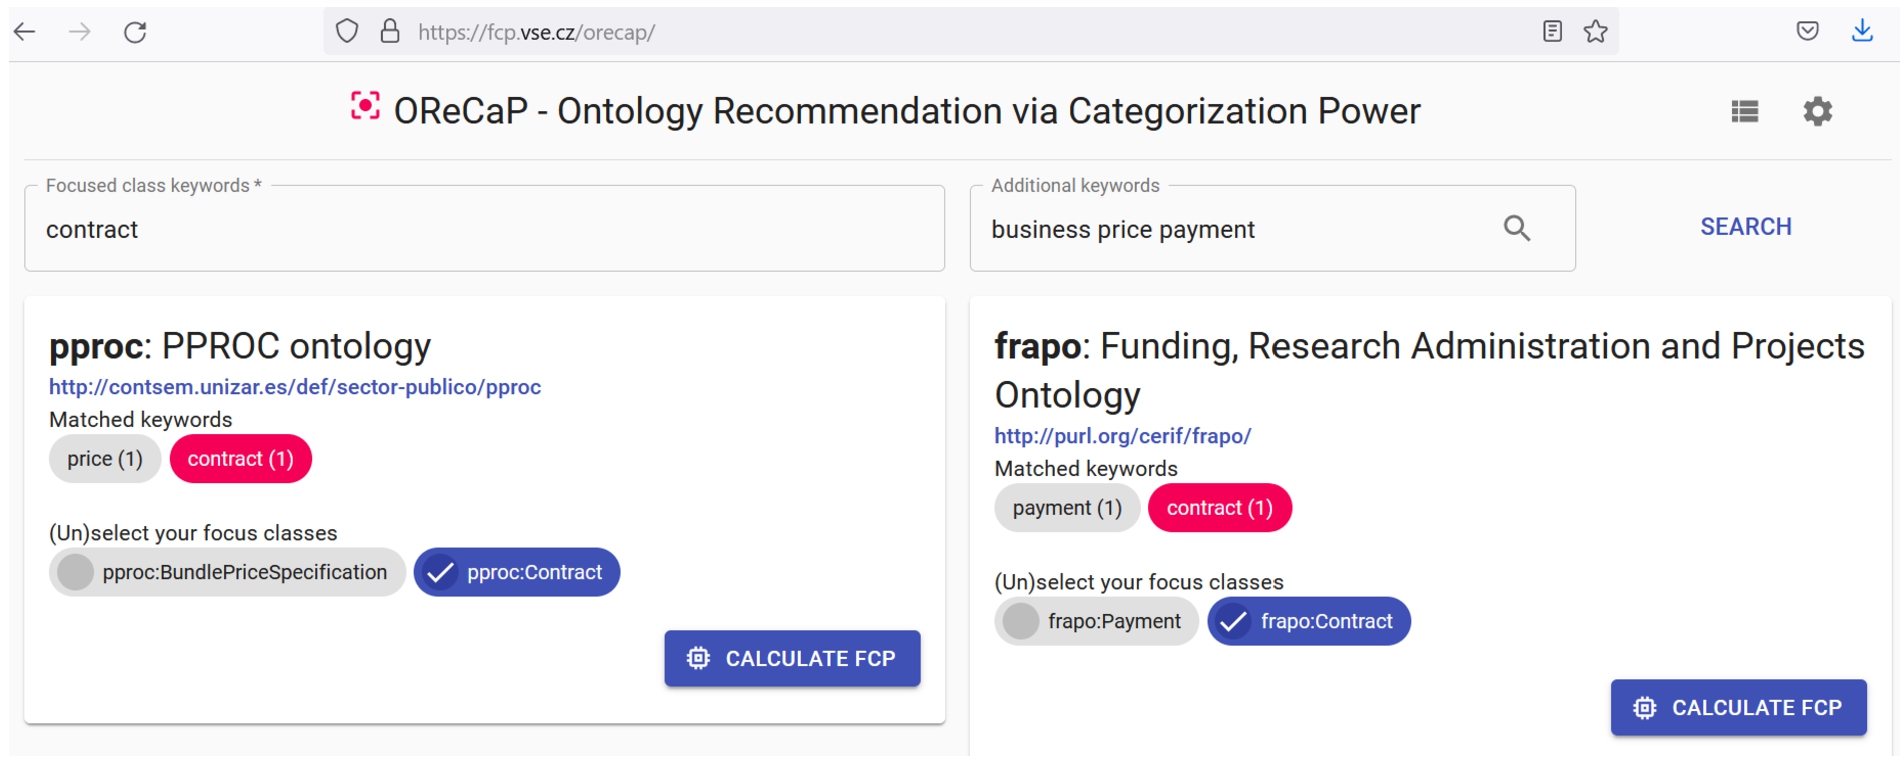 OReCaP interface: two ontologies found via keyword search, with focus class and additional match.